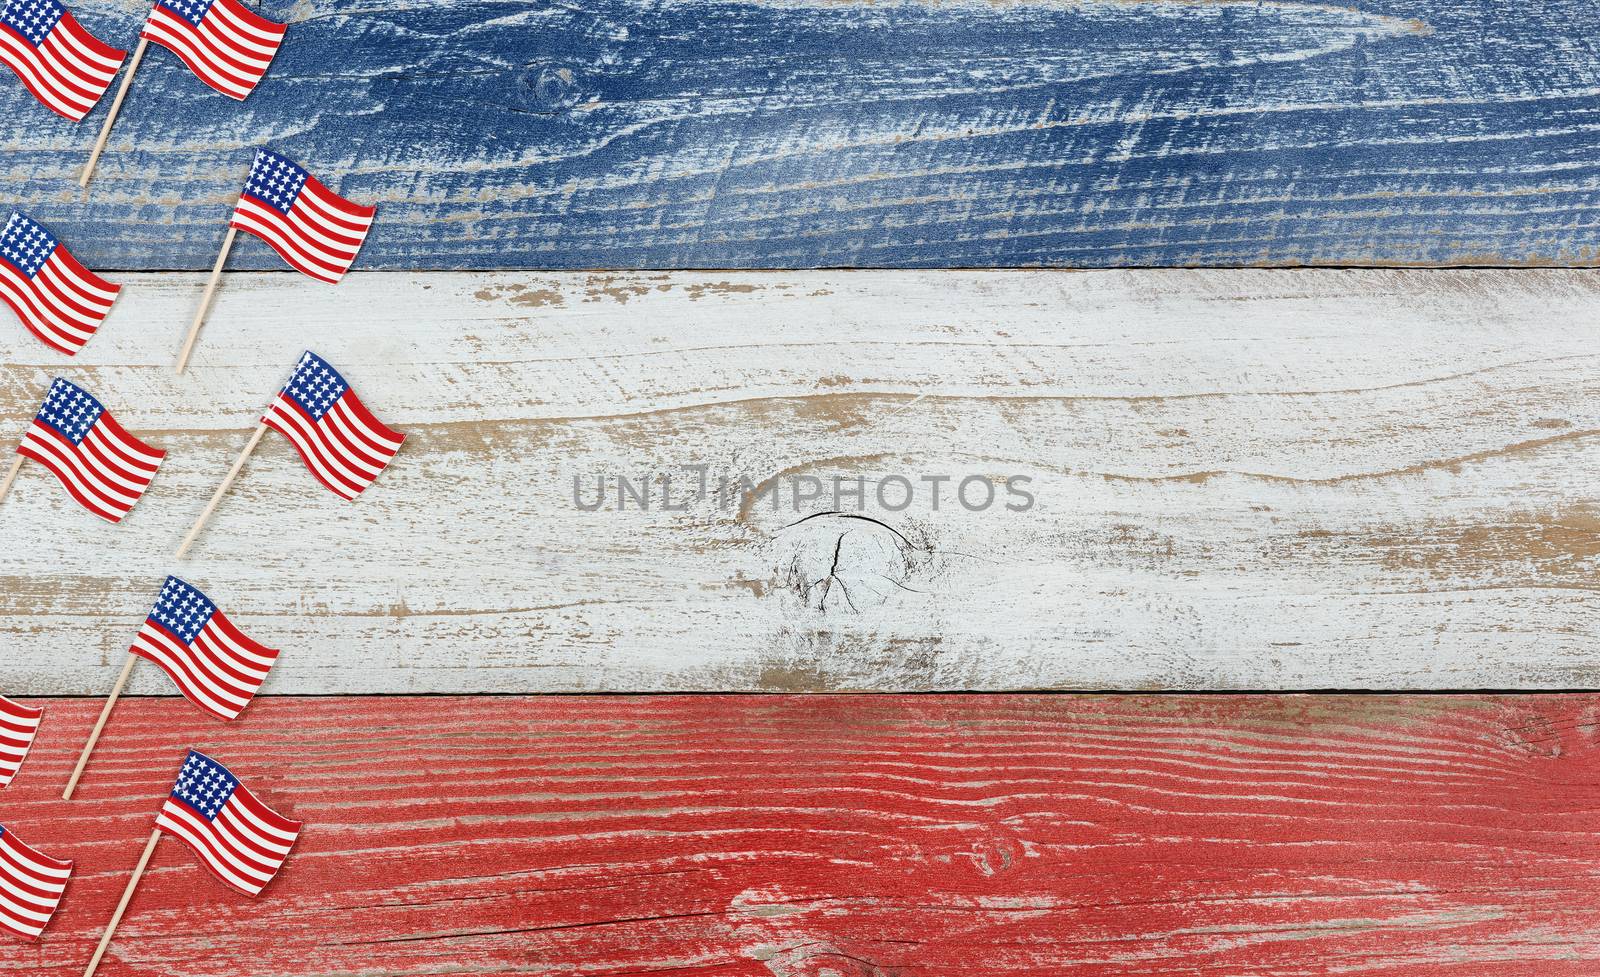 Flay lay view of USA mini flags on rustic wooden boards painted in red, white and blues colors. 